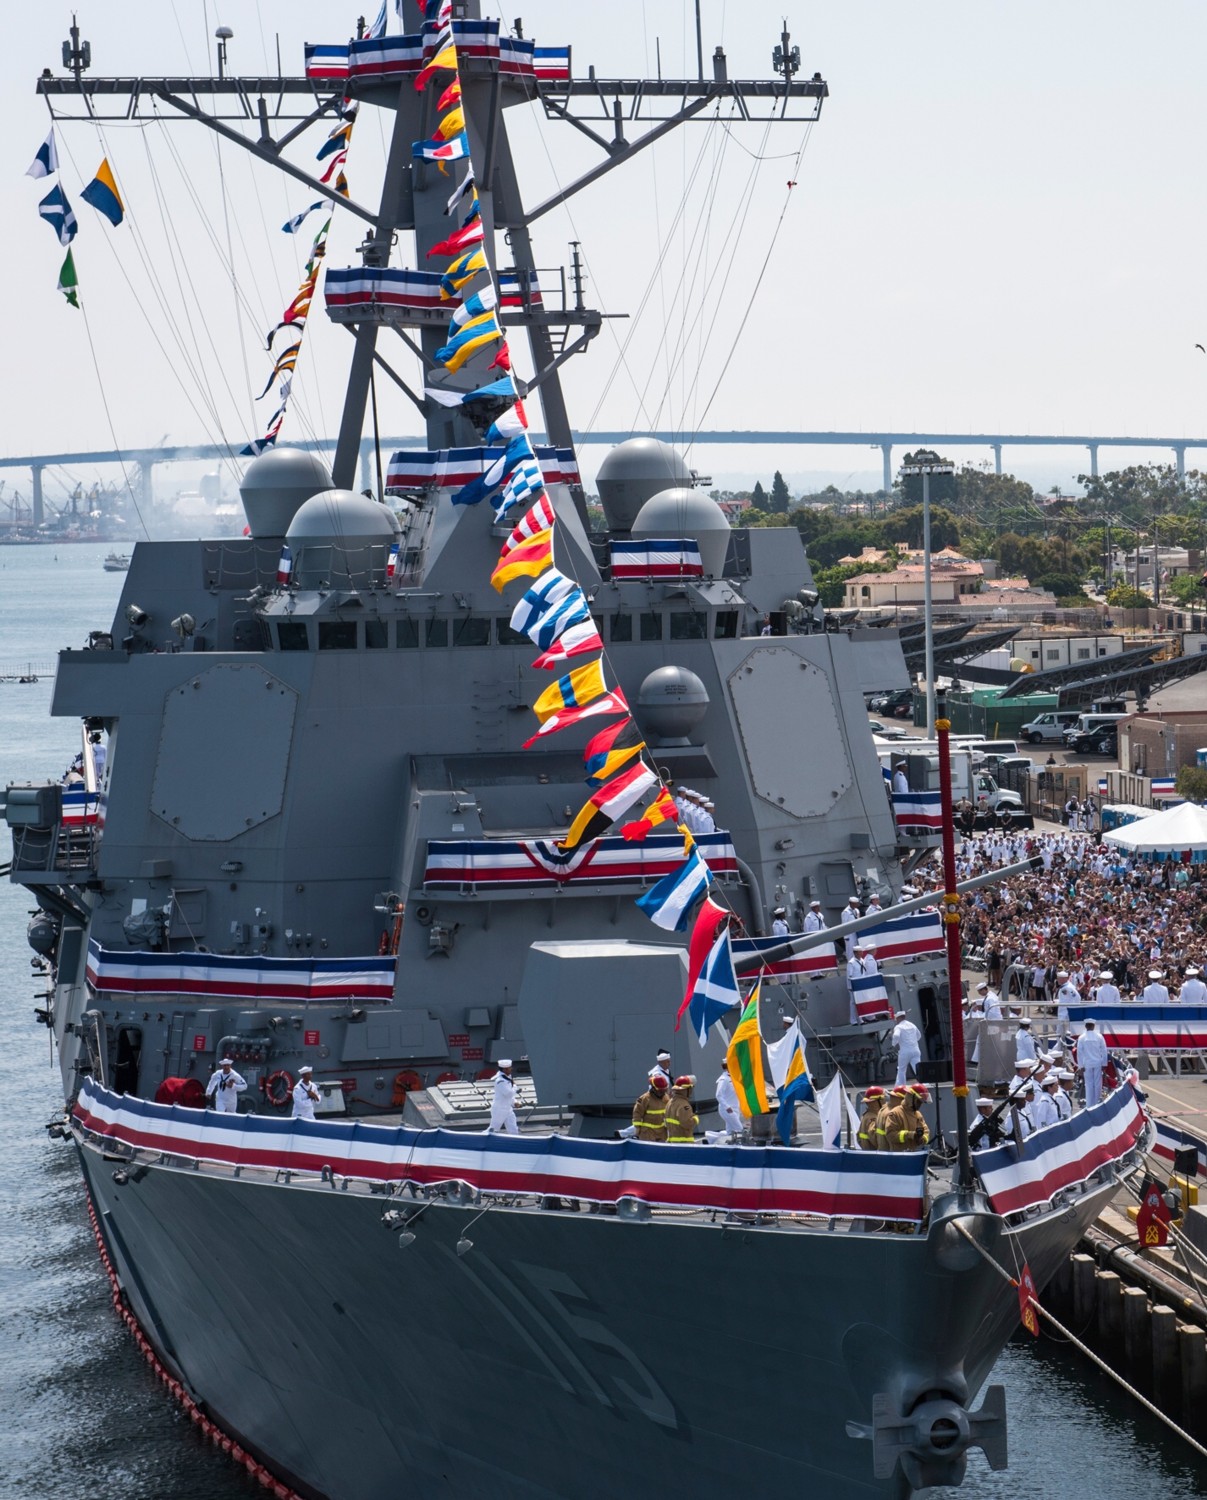 ddg-115 uss rafael peralta arleigh burke class guided missile destroyer us navy aegis 03 commissioning nas north island california